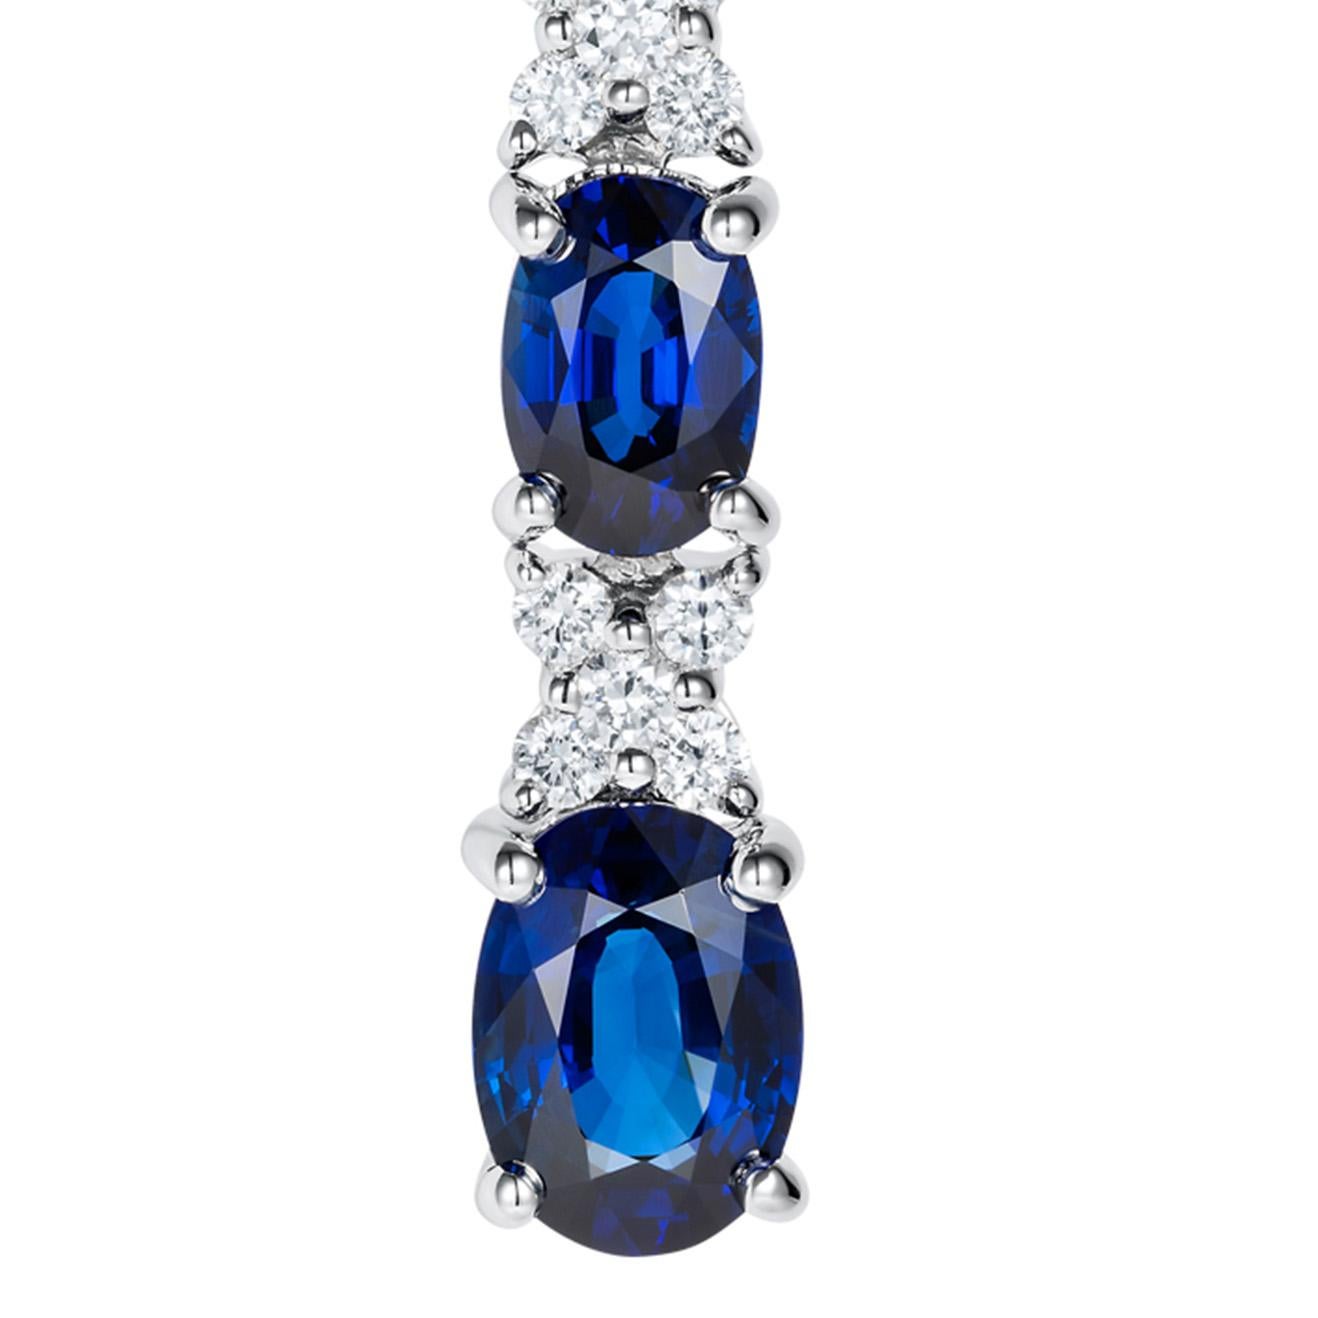 These exquisite sapphire and diamond earrings are an ode to love. Featuring oval royal blue sapphires set with white diamonds which form the X design. Beautifully created in 18K white gold – these stunning drop earrings contain 6 oval blue sapphires